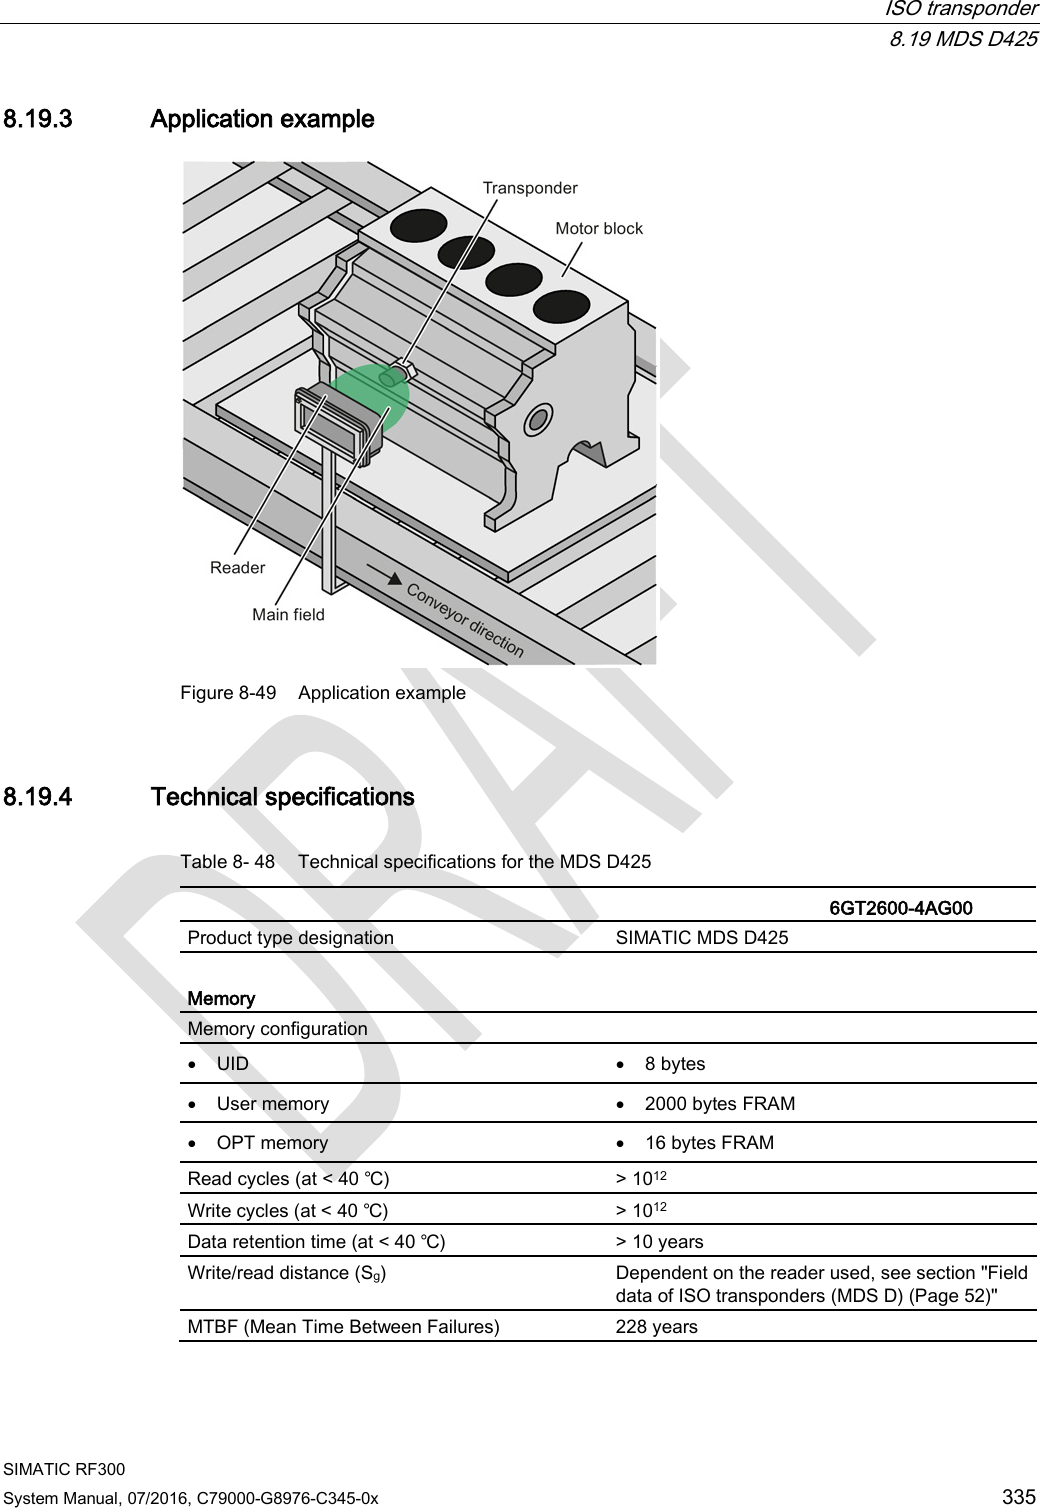  ISO transponder  8.19 MDS D425 SIMATIC RF300 System Manual, 07/2016, C79000-G8976-C345-0x 335 8.19.3 Application example  Figure 8-49 Application example 8.19.4 Technical specifications Table 8- 48 Technical specifications for the MDS D425    6GT2600-4AG00  Product type designation SIMATIC MDS D425  Memory Memory configuration   • UID • 8 bytes • User memory • 2000 bytes FRAM • OPT memory • 16 bytes FRAM Read cycles (at &lt; 40 ℃) &gt; 1012 Write cycles (at &lt; 40 ℃) &gt; 1012 Data retention time (at &lt; 40 ℃) &gt; 10 years Write/read distance (Sg)  Dependent on the reader used, see section &quot;Field data of ISO transponders (MDS D) (Page 52)&quot; MTBF (Mean Time Between Failures) 228 years 